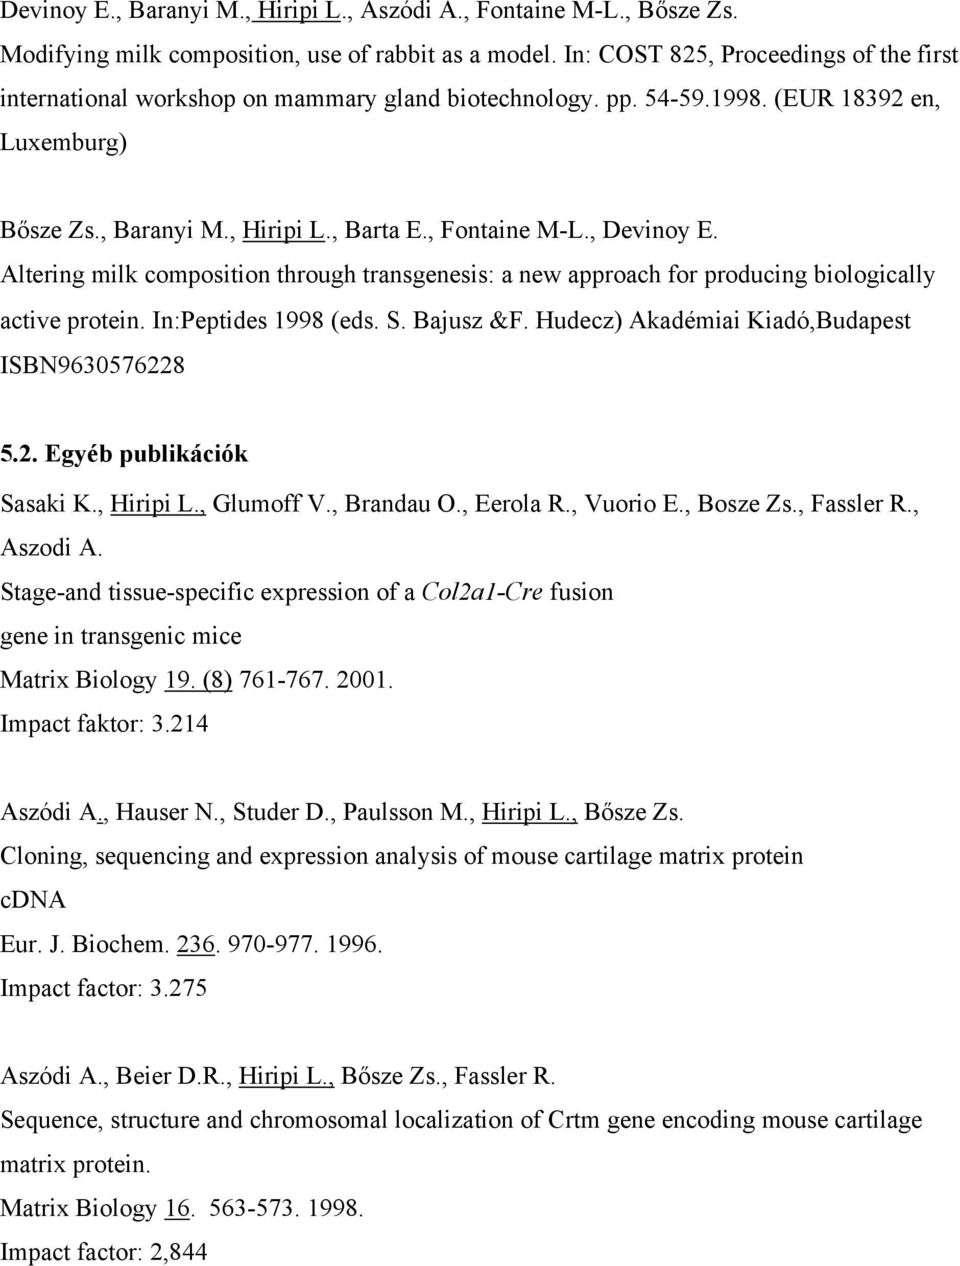 , Devinoy E. Altering milk composition through transgenesis: a new approach for producing biologically active protein. In:Peptides 1998 (eds. S. Bajusz &F.